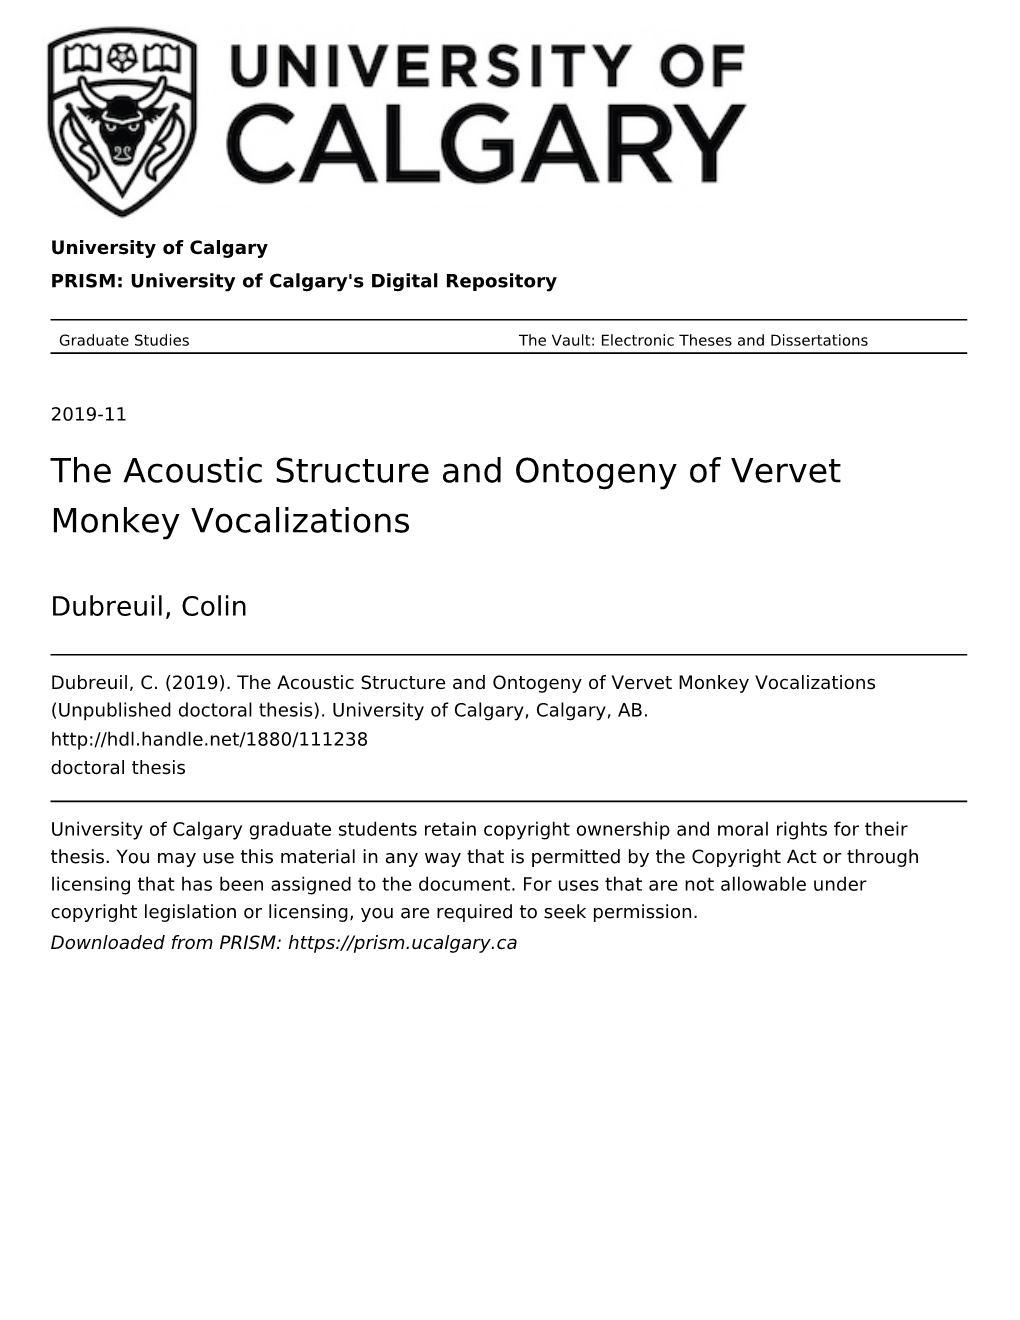 The Acoustic Structure and Ontogeny of Vervet Monkey Vocalizations